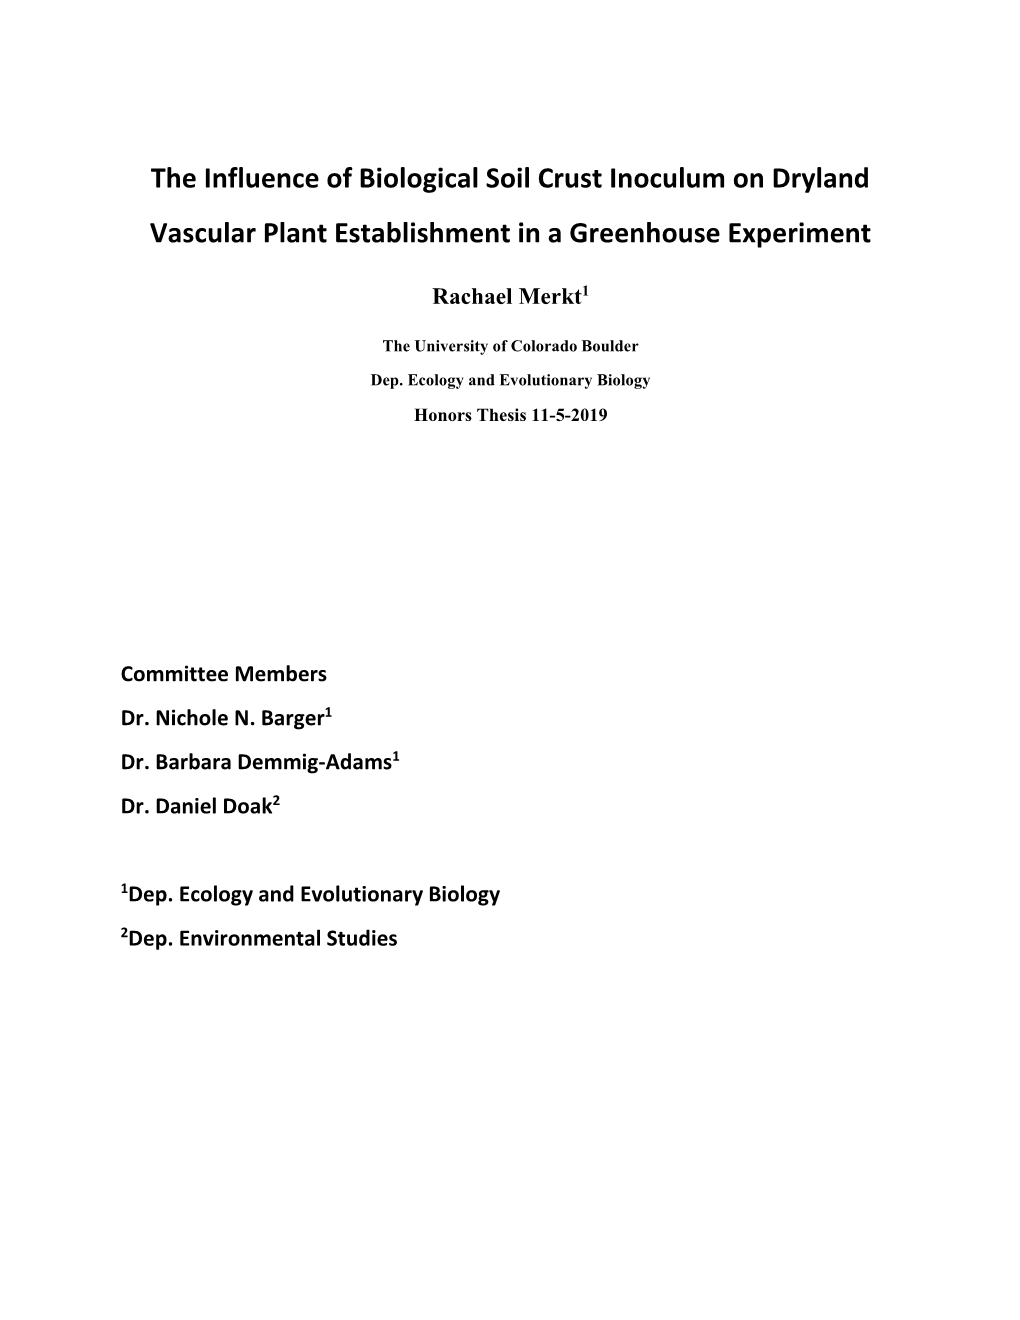 The Influence of Biological Soil Crust Inoculum on Dryland Vascular Plant Establishment in a Greenhouse Experiment